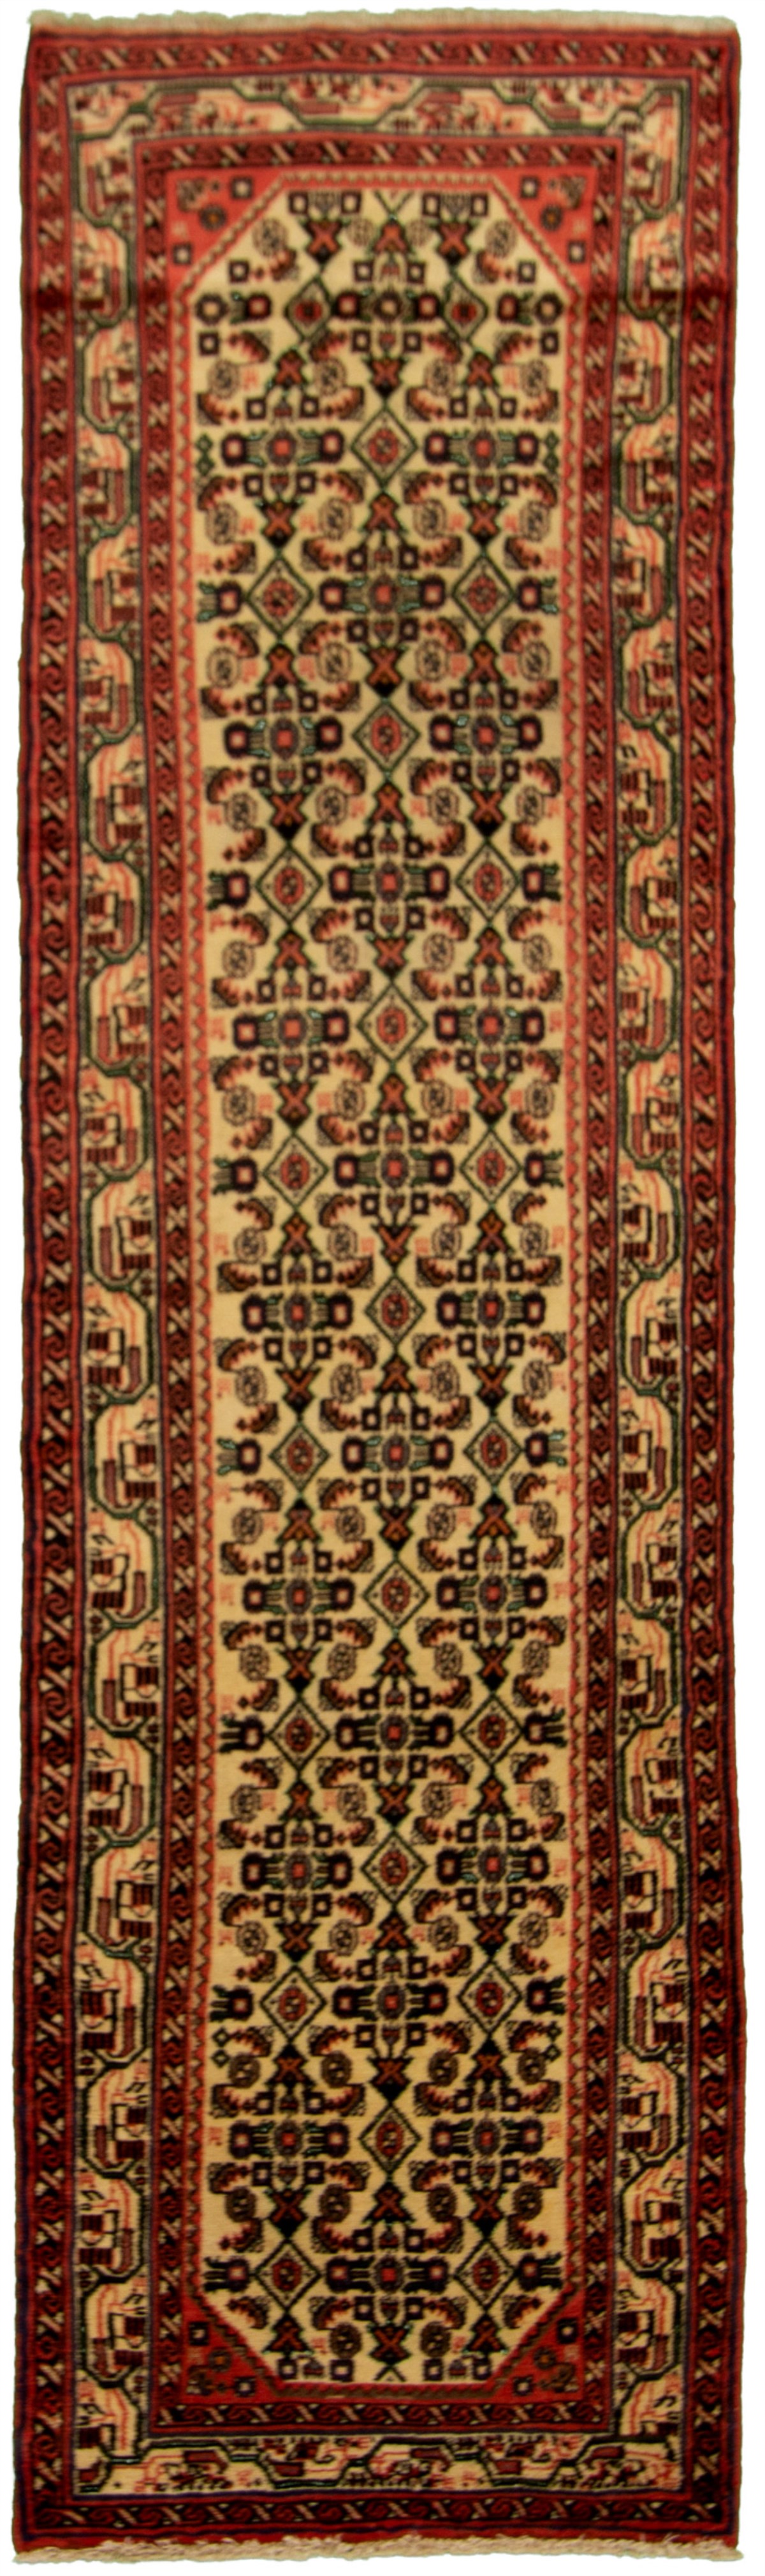 Hand-knotted Hamadan Cream, Red Wool Rug 2'6" x 9'5" Size: 2'6" x 9'5"  